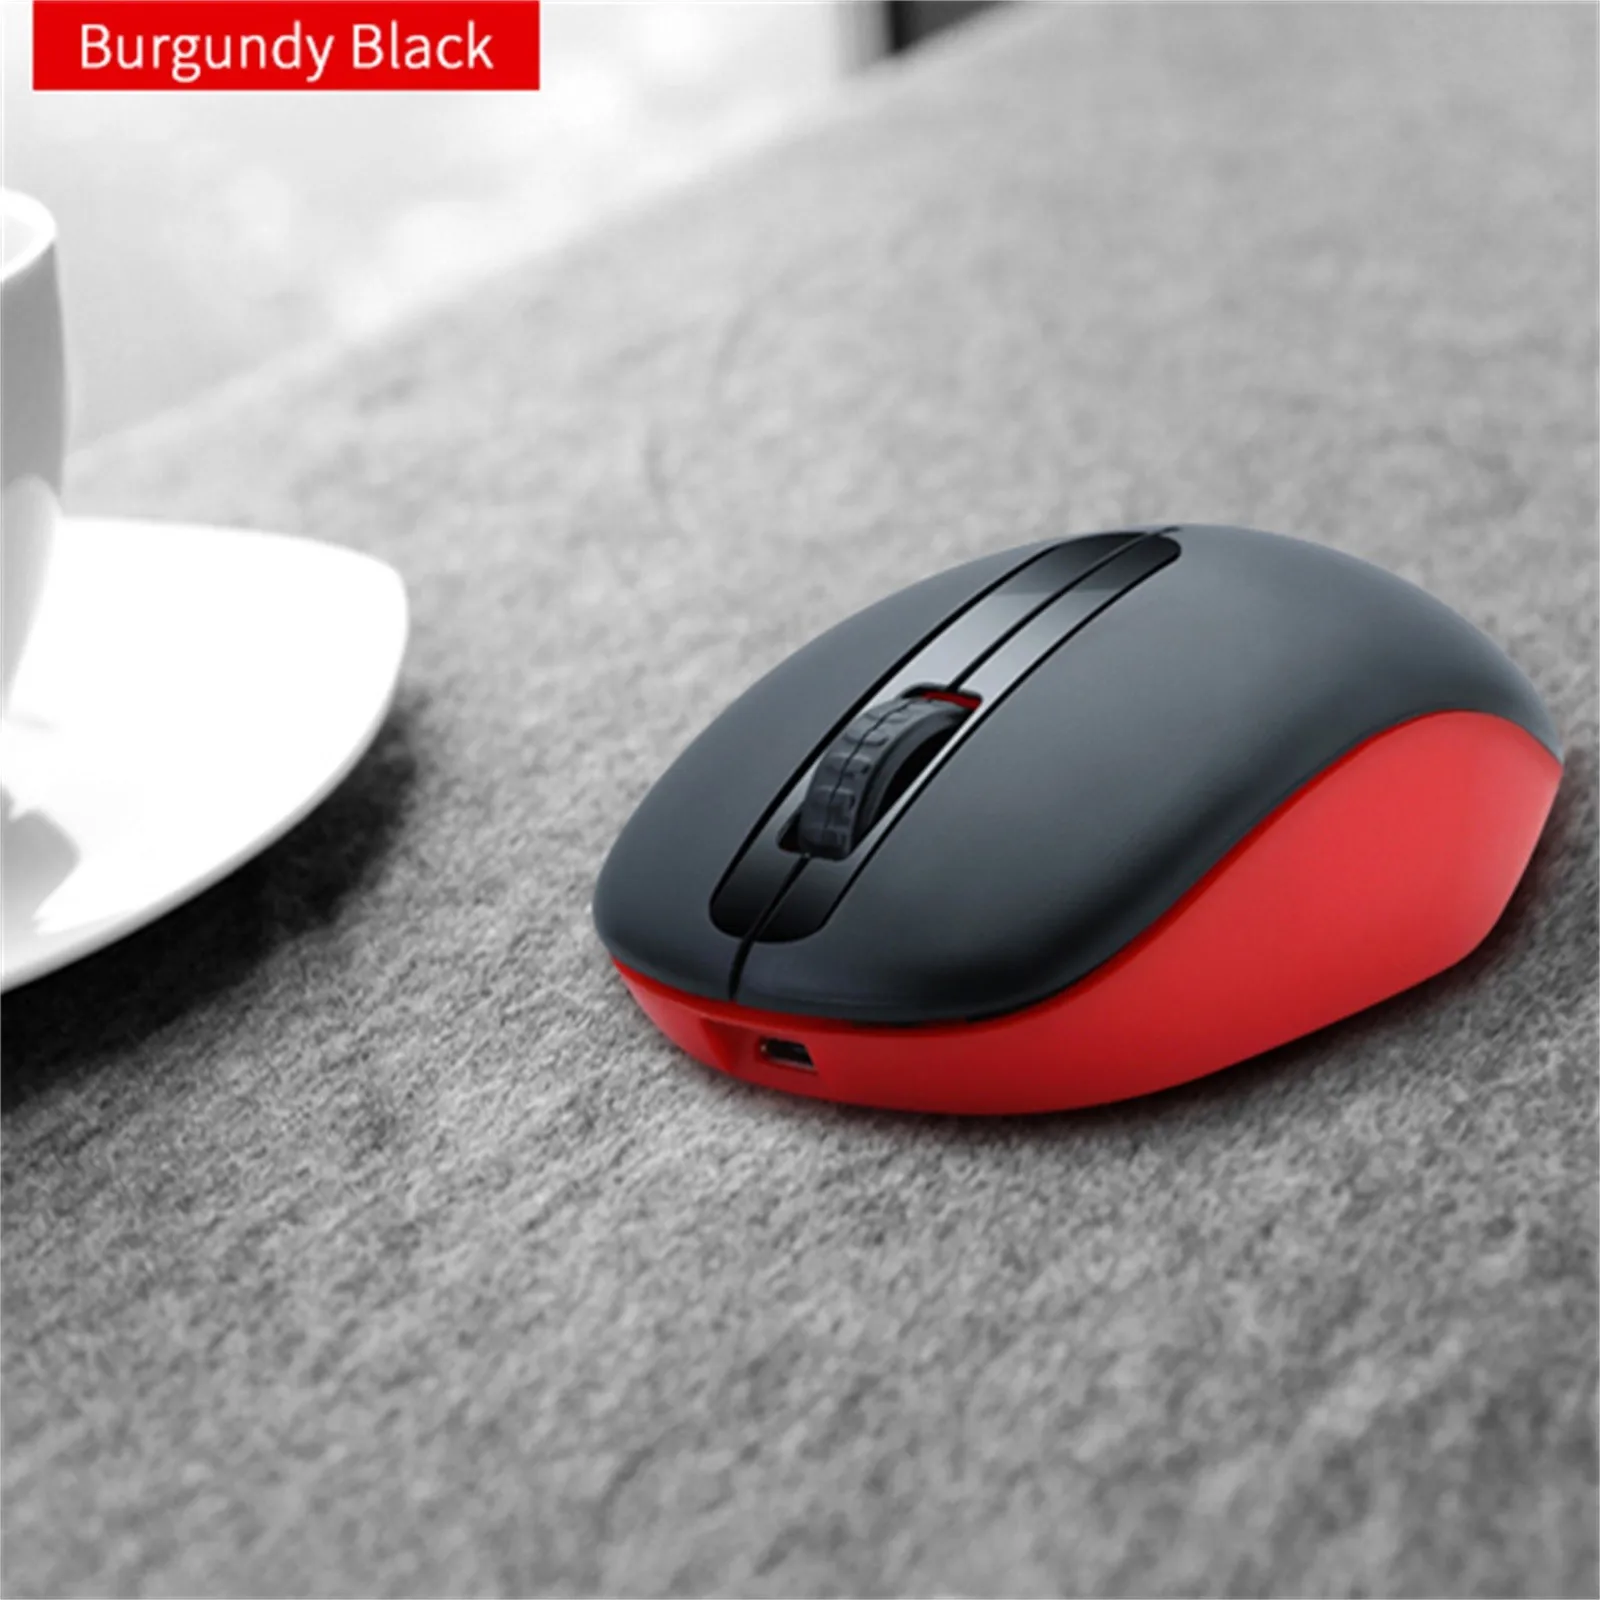 types of computer mouse USB Wireless Mouse Rechargeable Laptop Desktop Mouse Gaming Office Mouse Ergonomic Mini Mouse USB Optical Mice For PC laptop cheap wireless gaming mouse